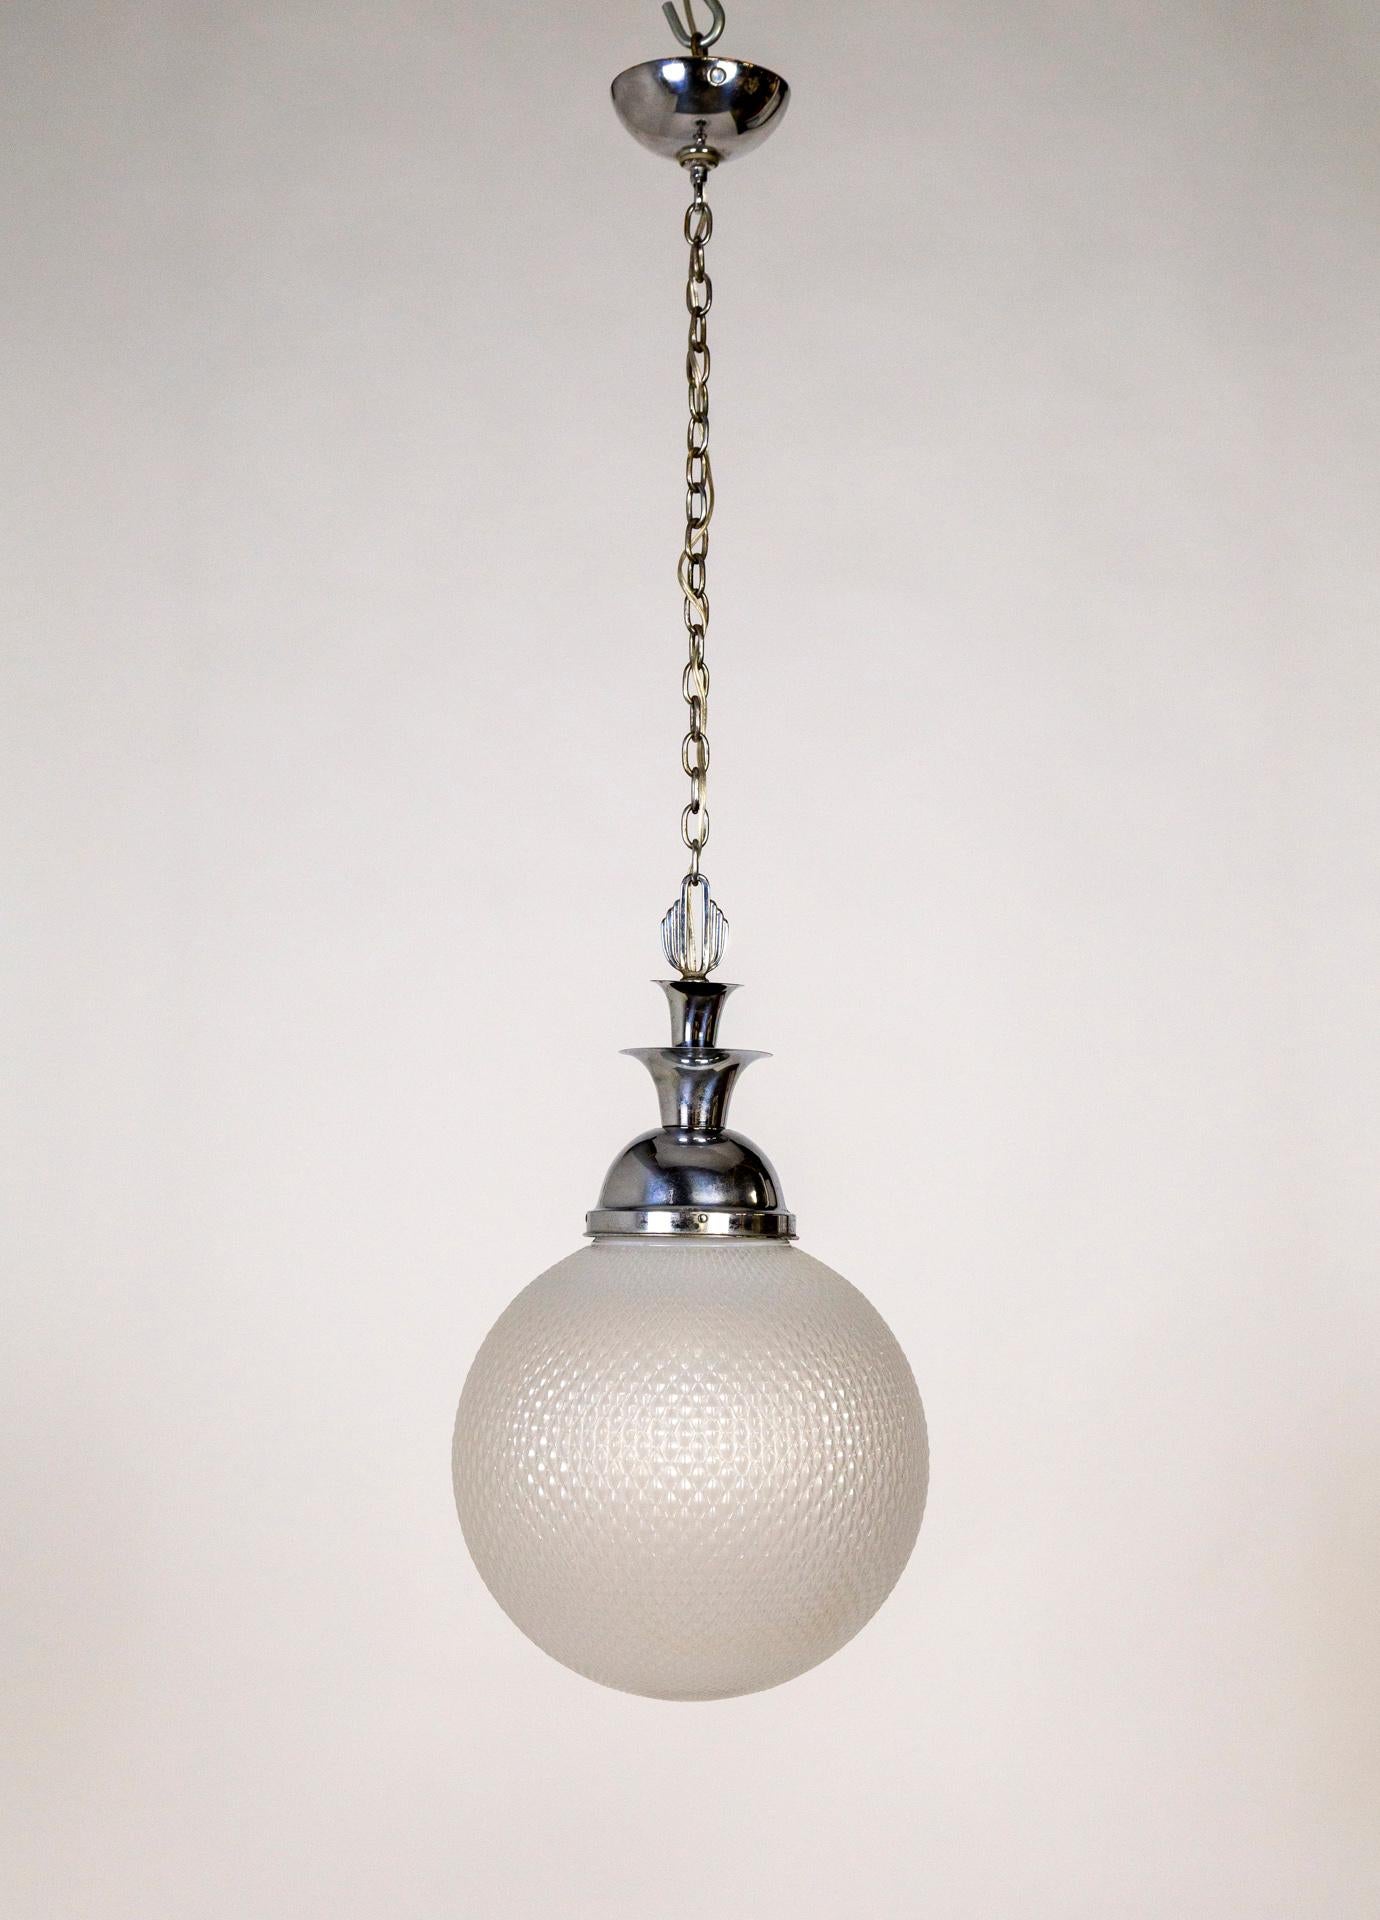 Large Art Deco Chrome & Textured Opal Glass Globe Pendant Light  In Good Condition For Sale In San Francisco, CA